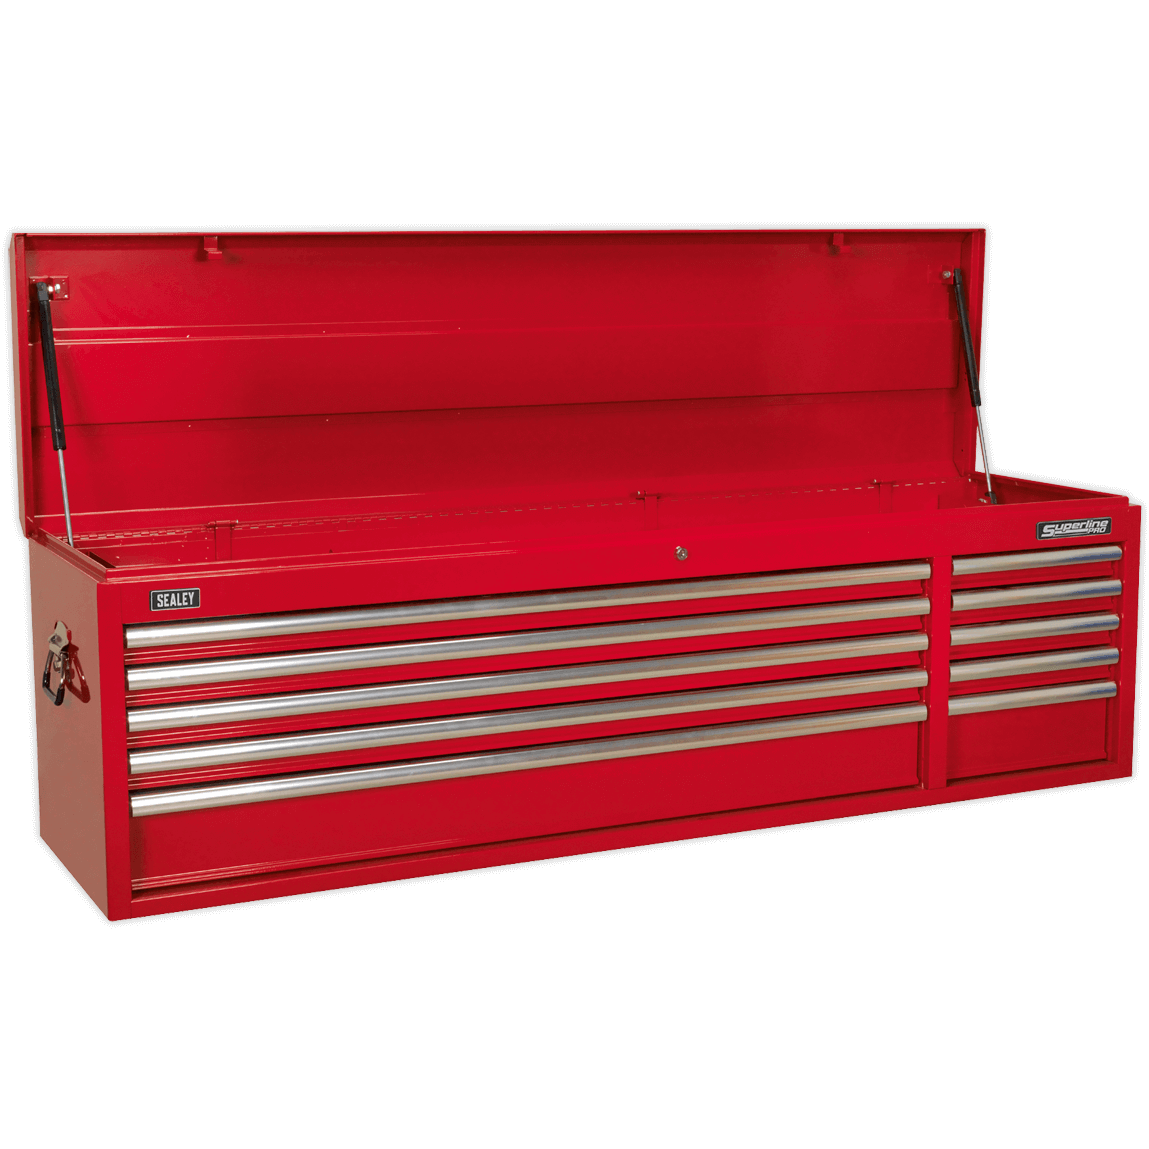 Sealey Superline Pro 10 Drawer Heavy Duty Wide Tool Chest Red